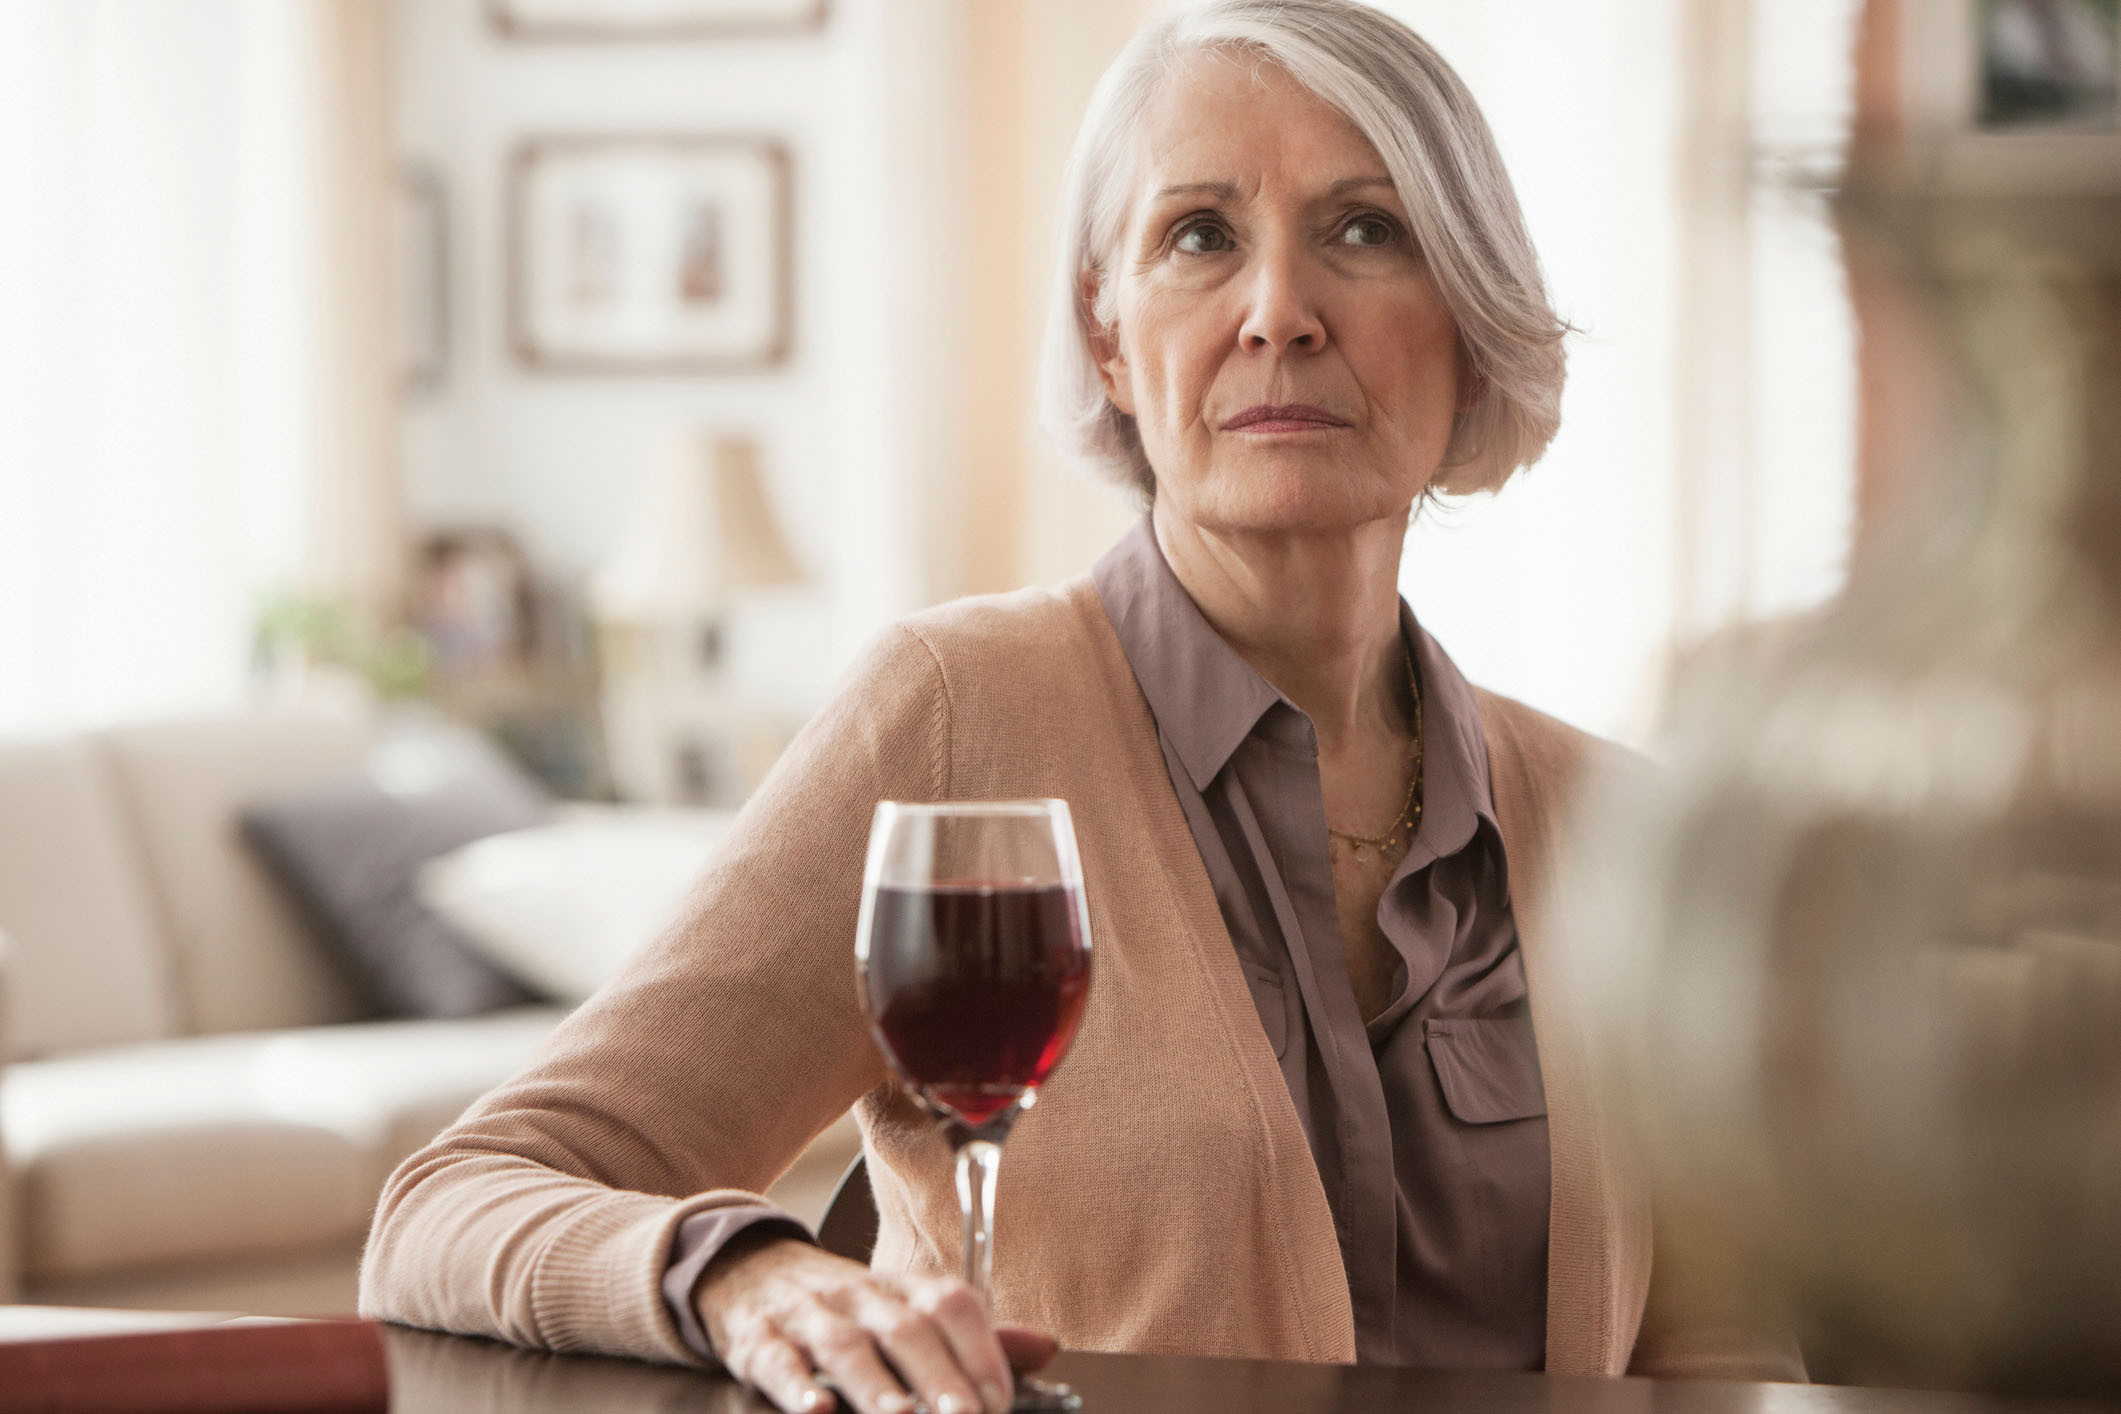 photo of a mature woman at home with a glass of red wine, looking serious and concerned